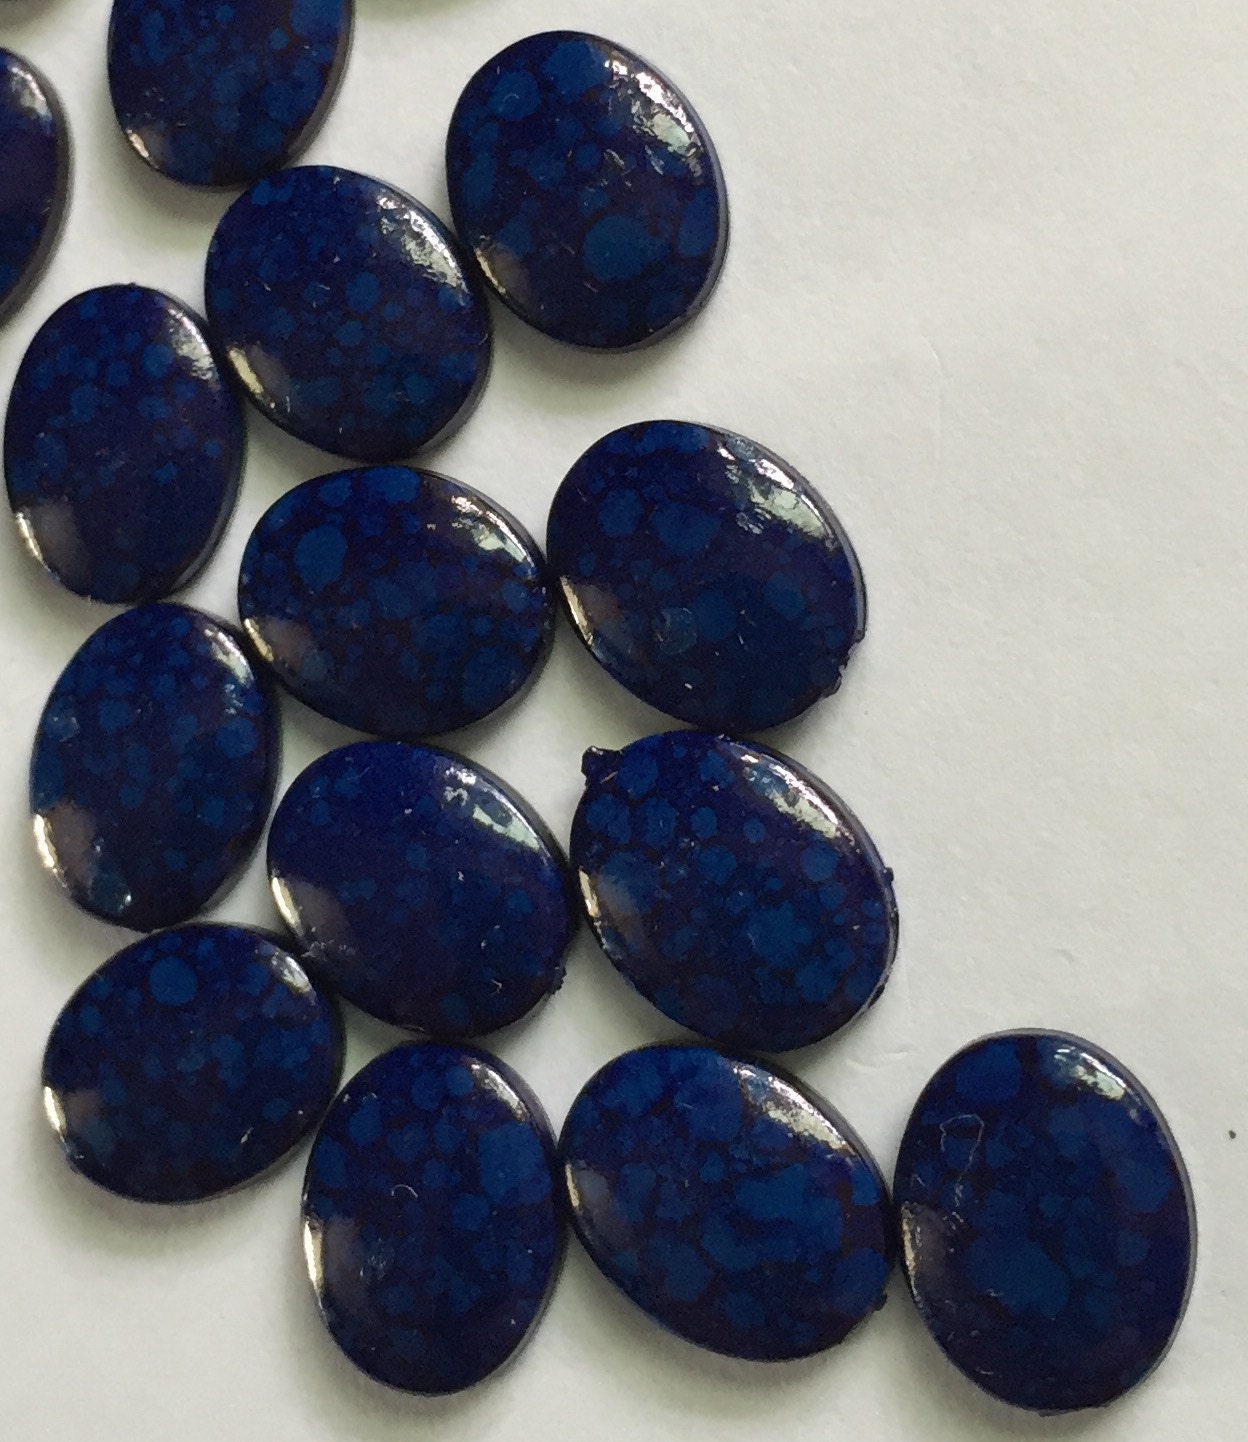 Vintage Blue Cabochons, Acrylic Spotted Blue Cabochons, 11mm x 8mm Cabs